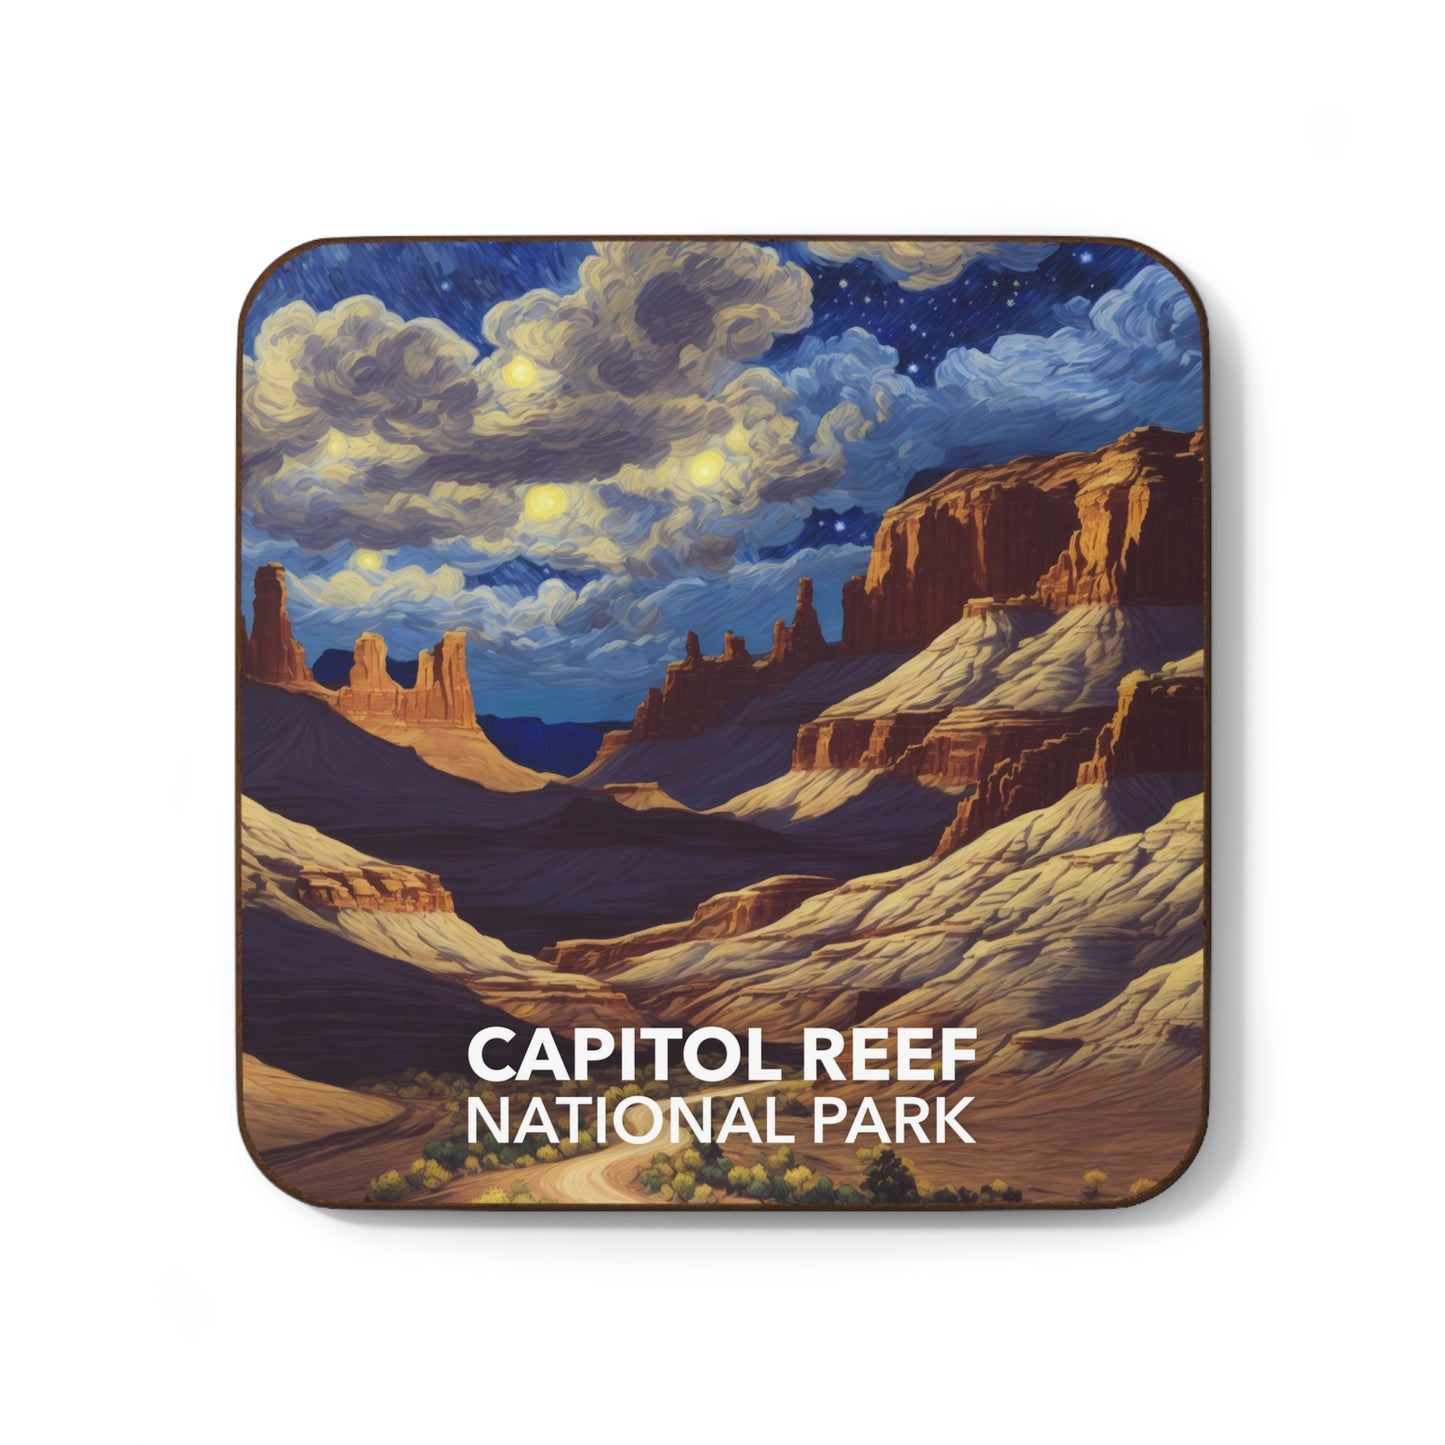 Capitol Reef National Park Coaster - The Starry Night